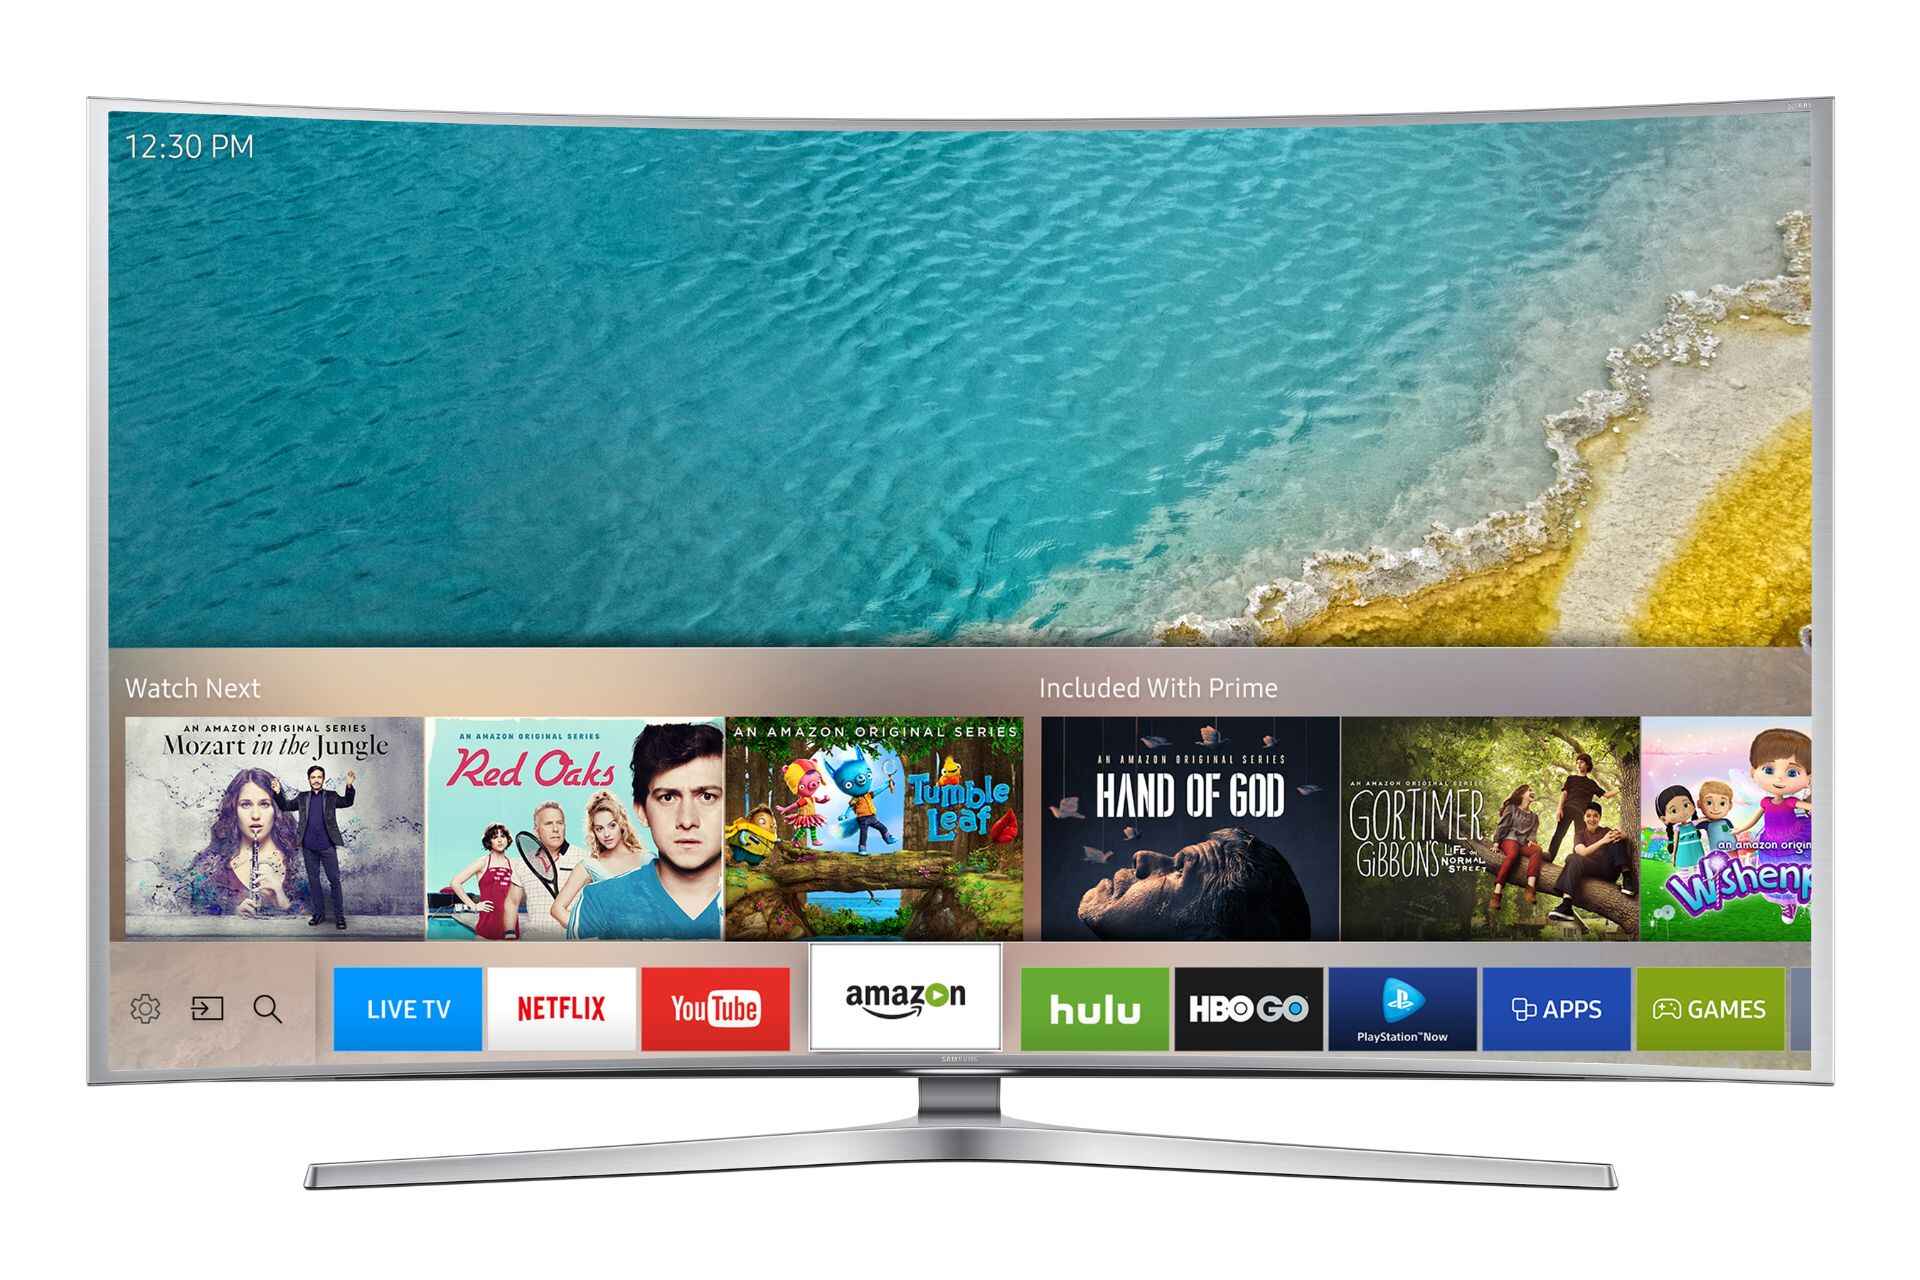 How To Use Internet On Samsung Smart TV